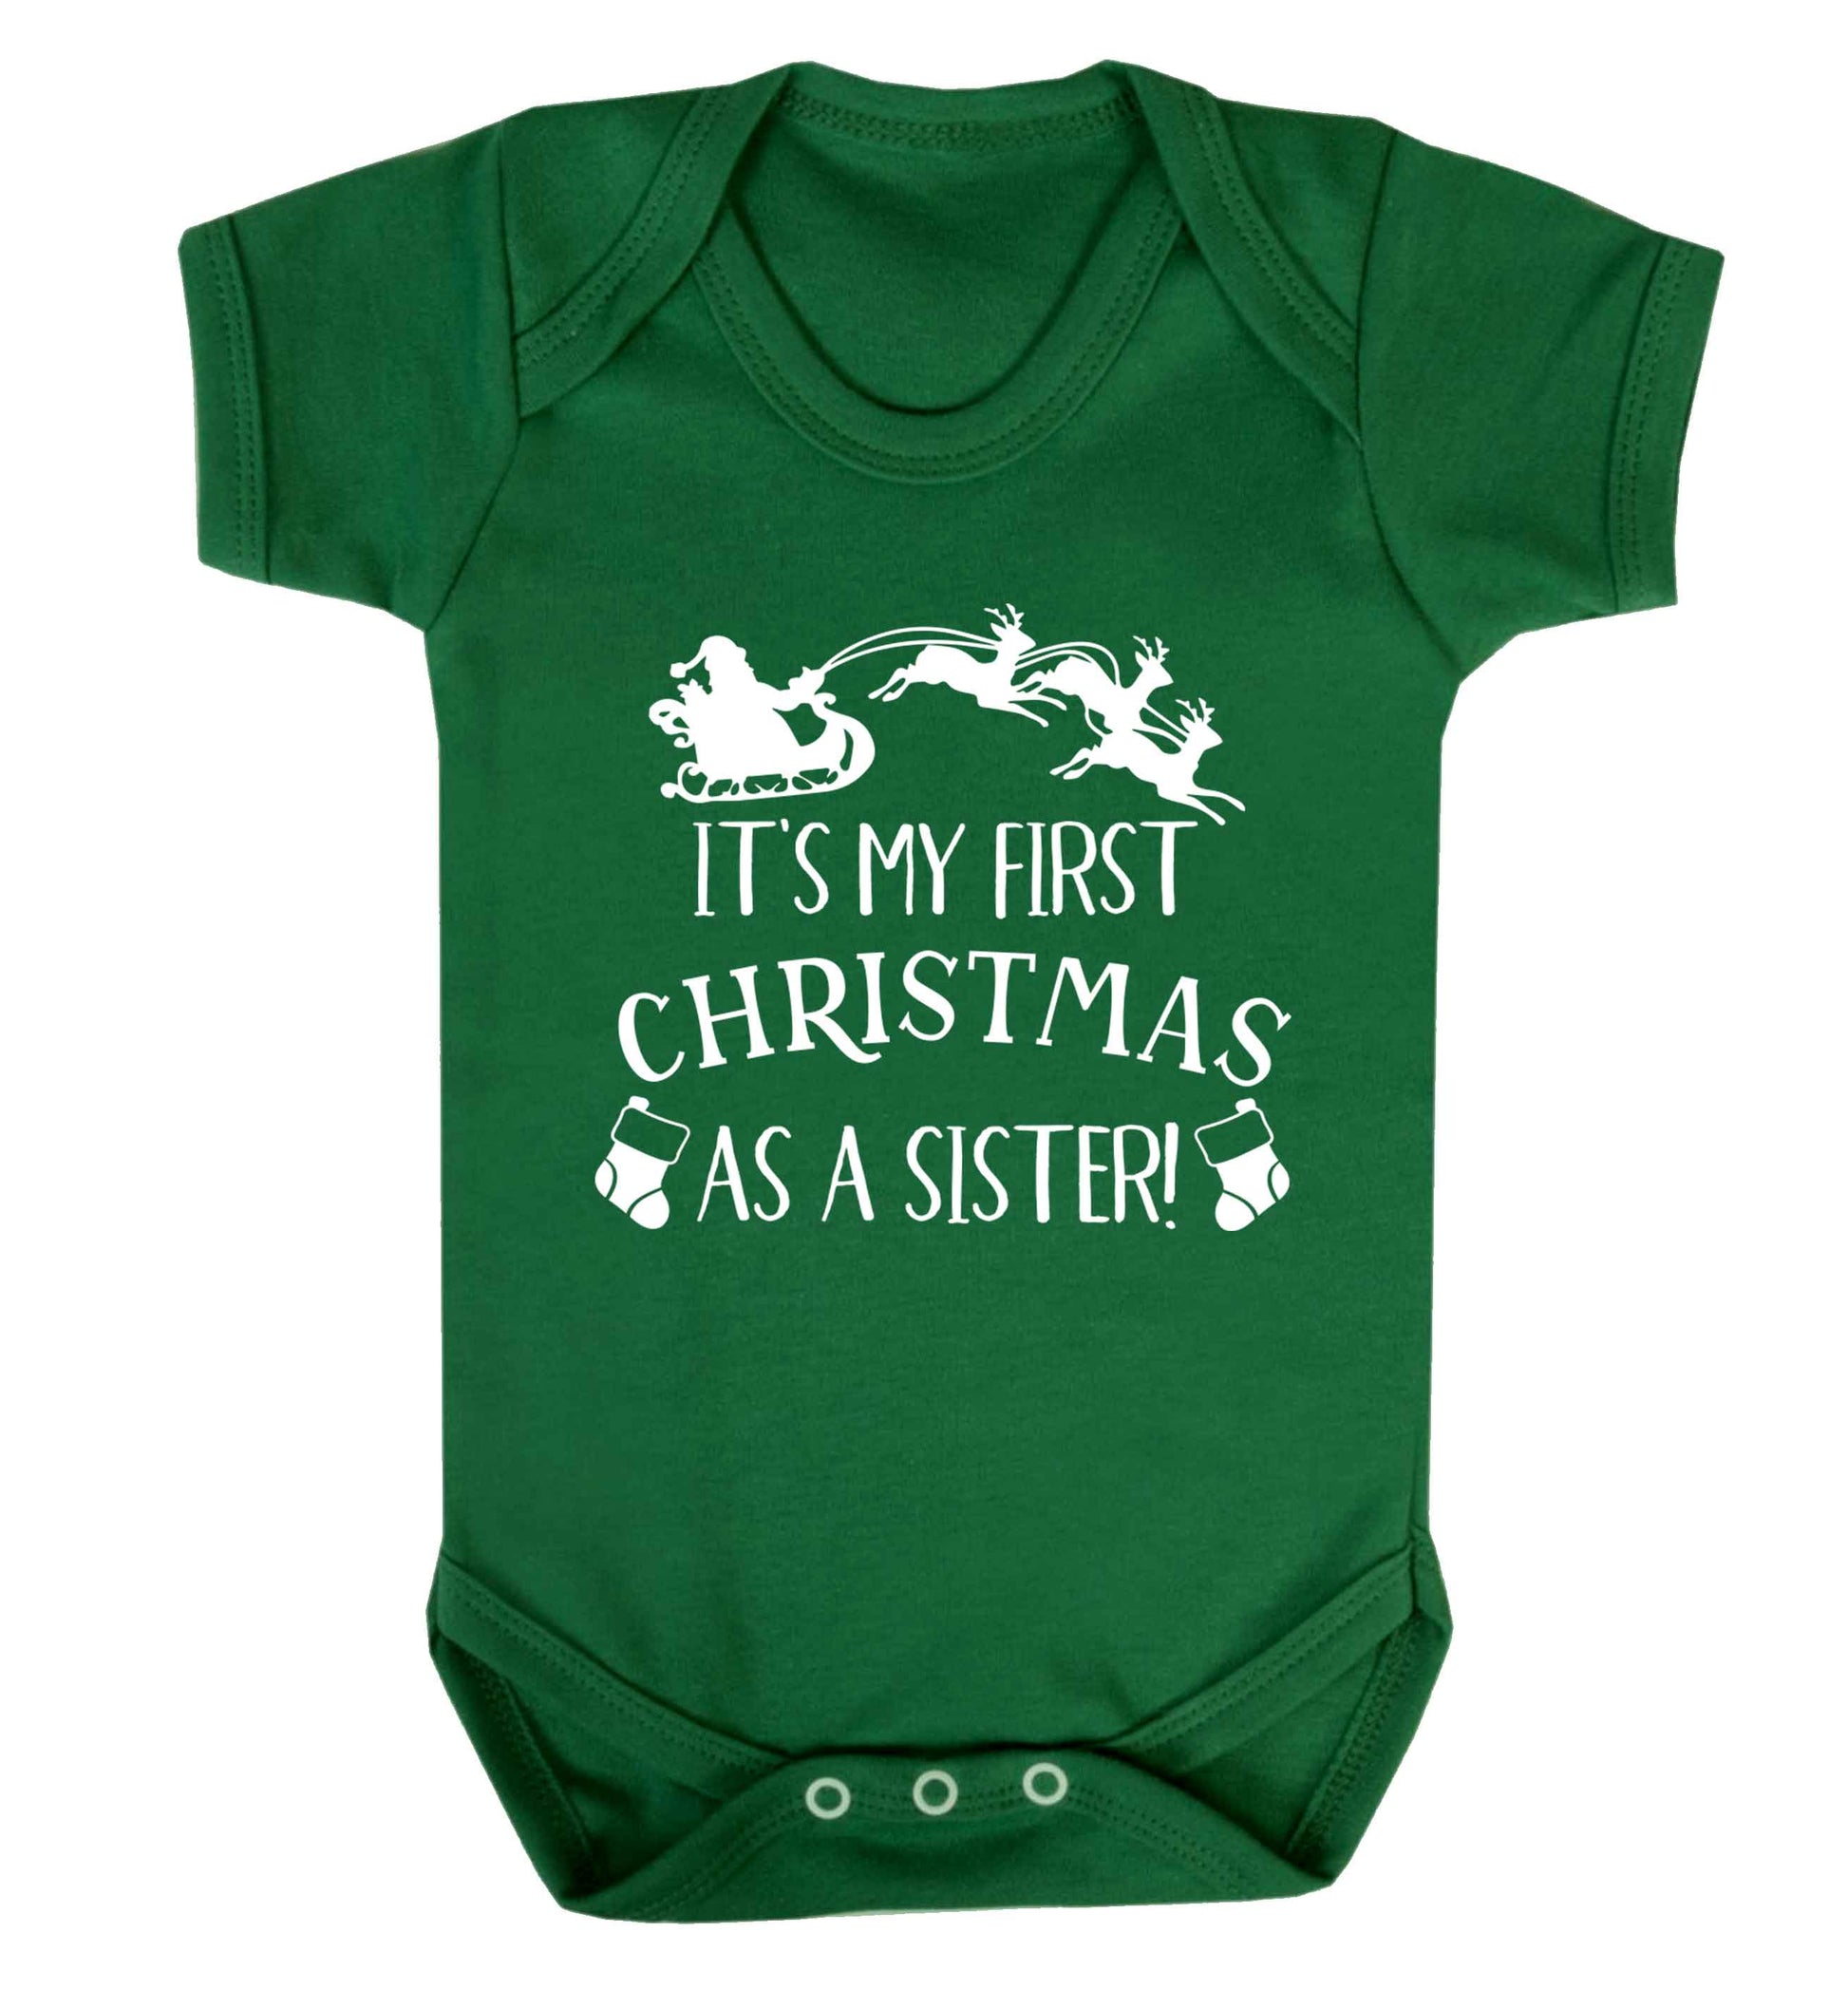 It's my first Christmas as a sister! Baby Vest green 18-24 months